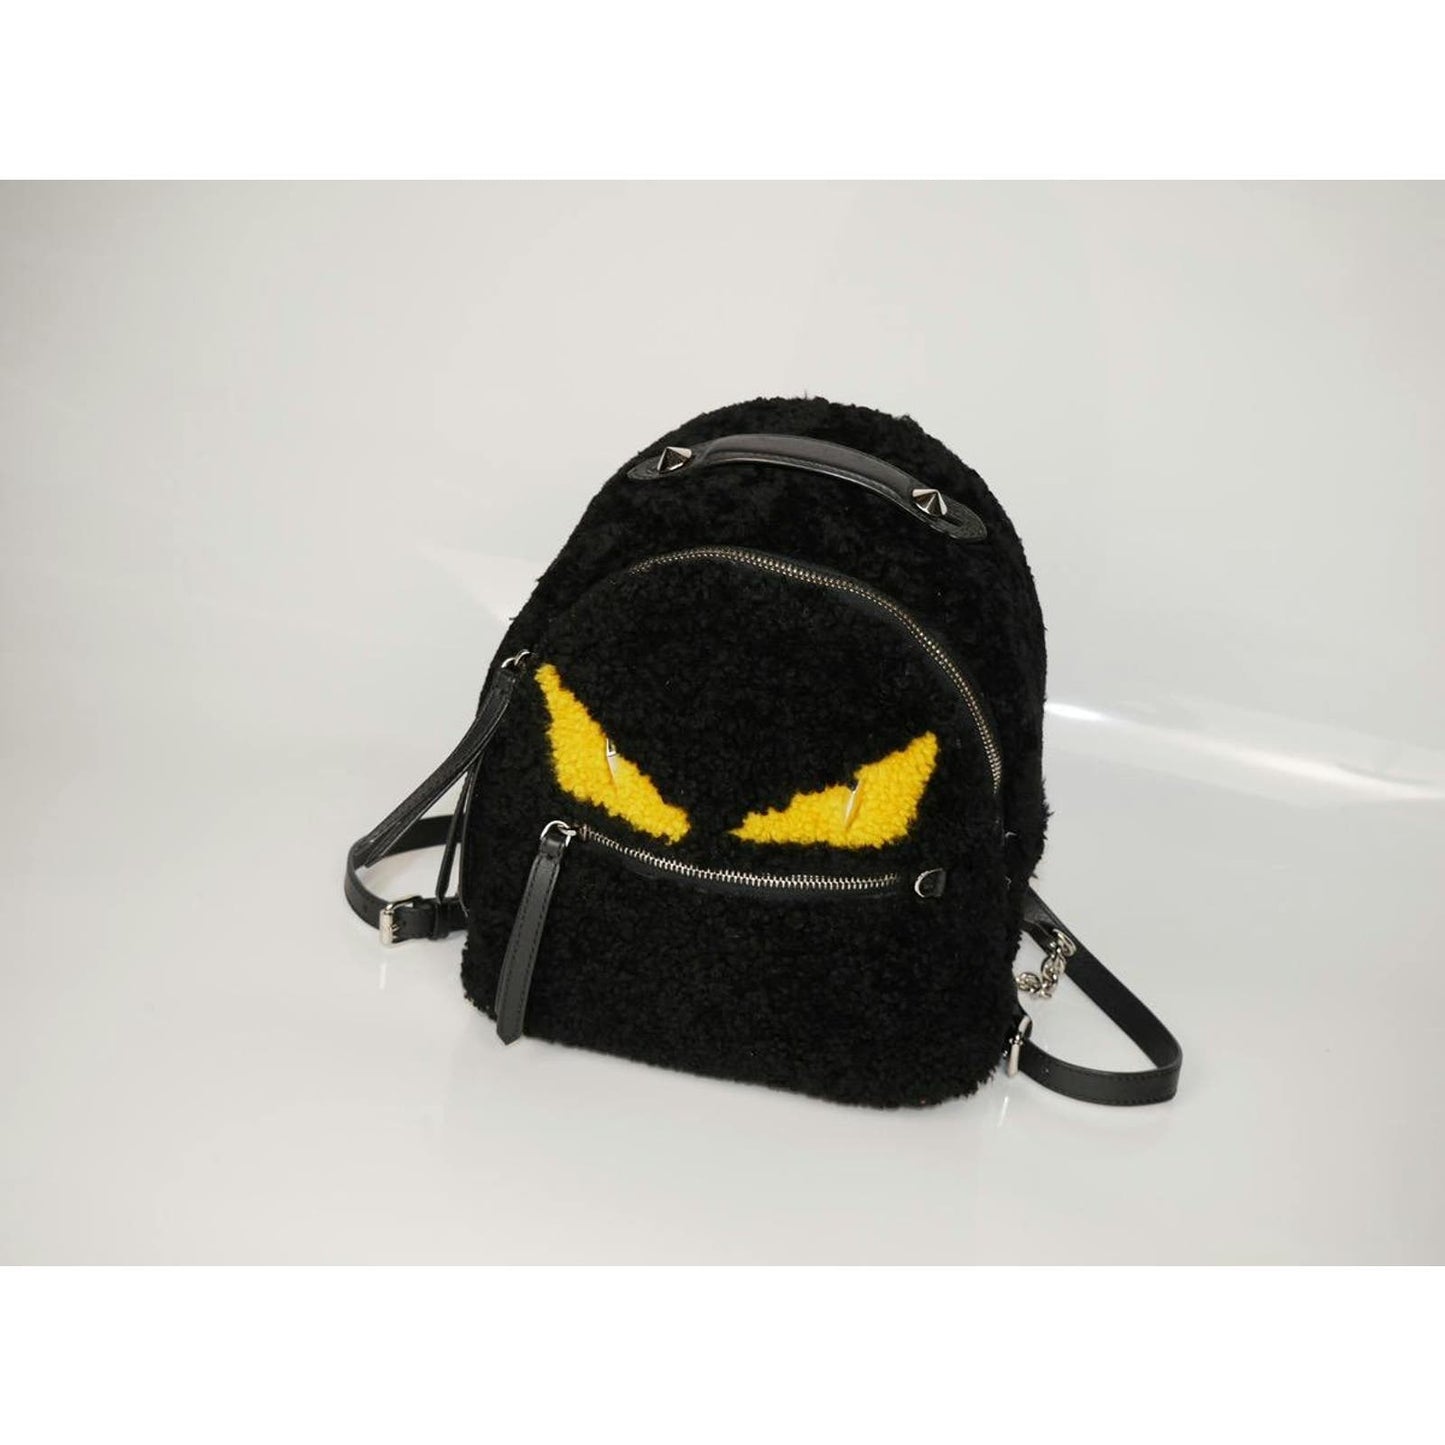 Fendi Black Shearling and Leather Monster Backpack